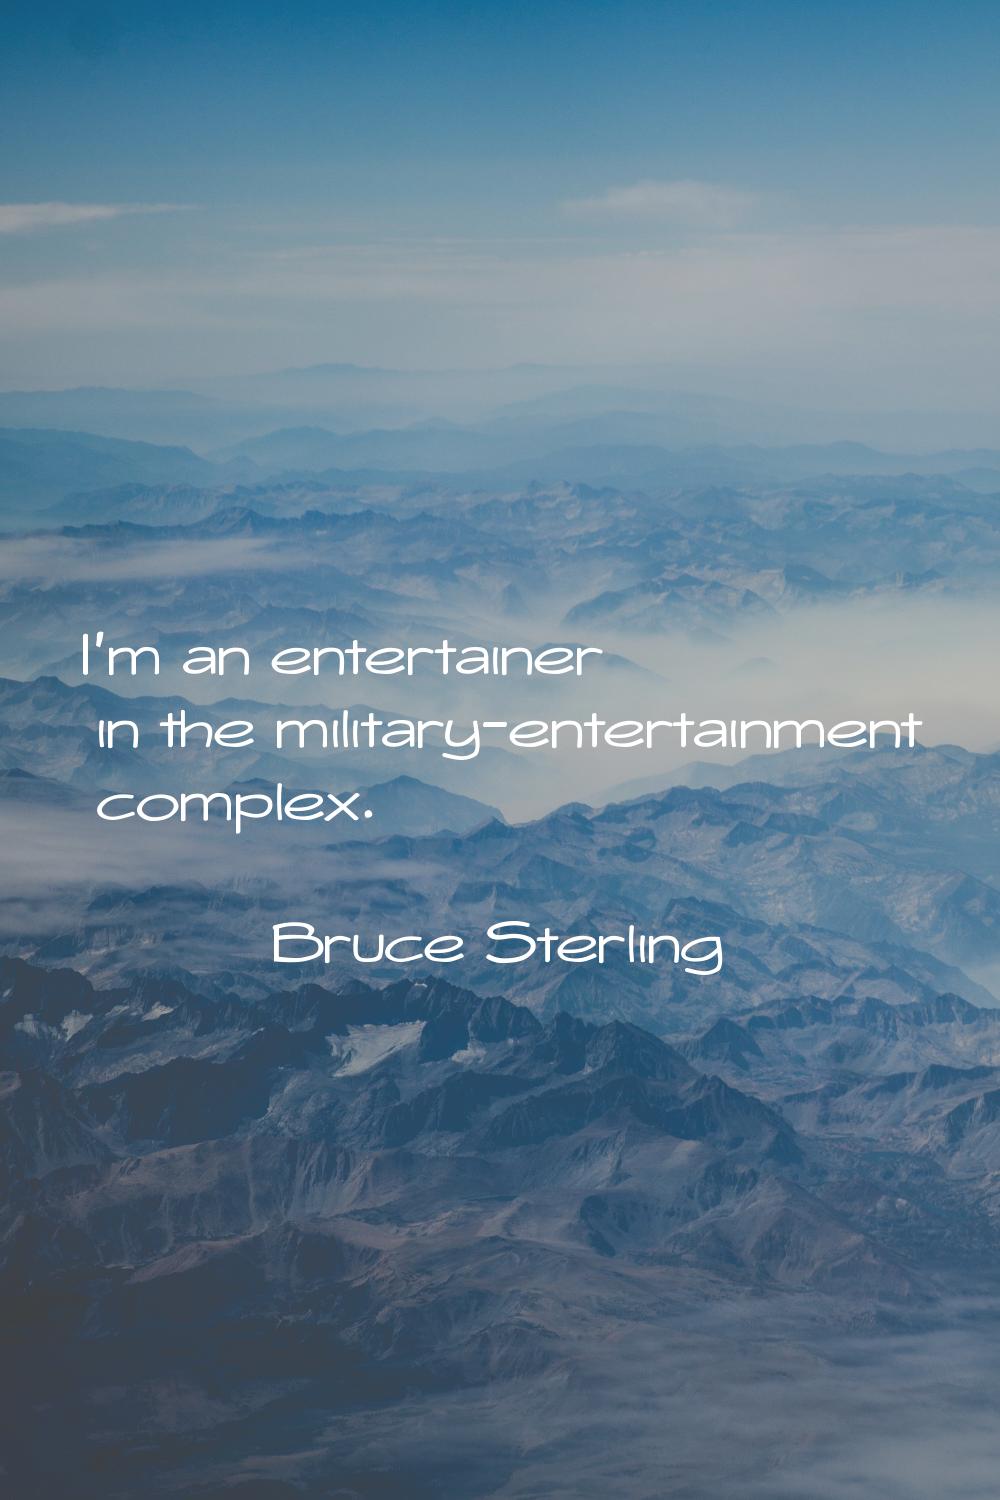 I'm an entertainer in the military-entertainment complex.